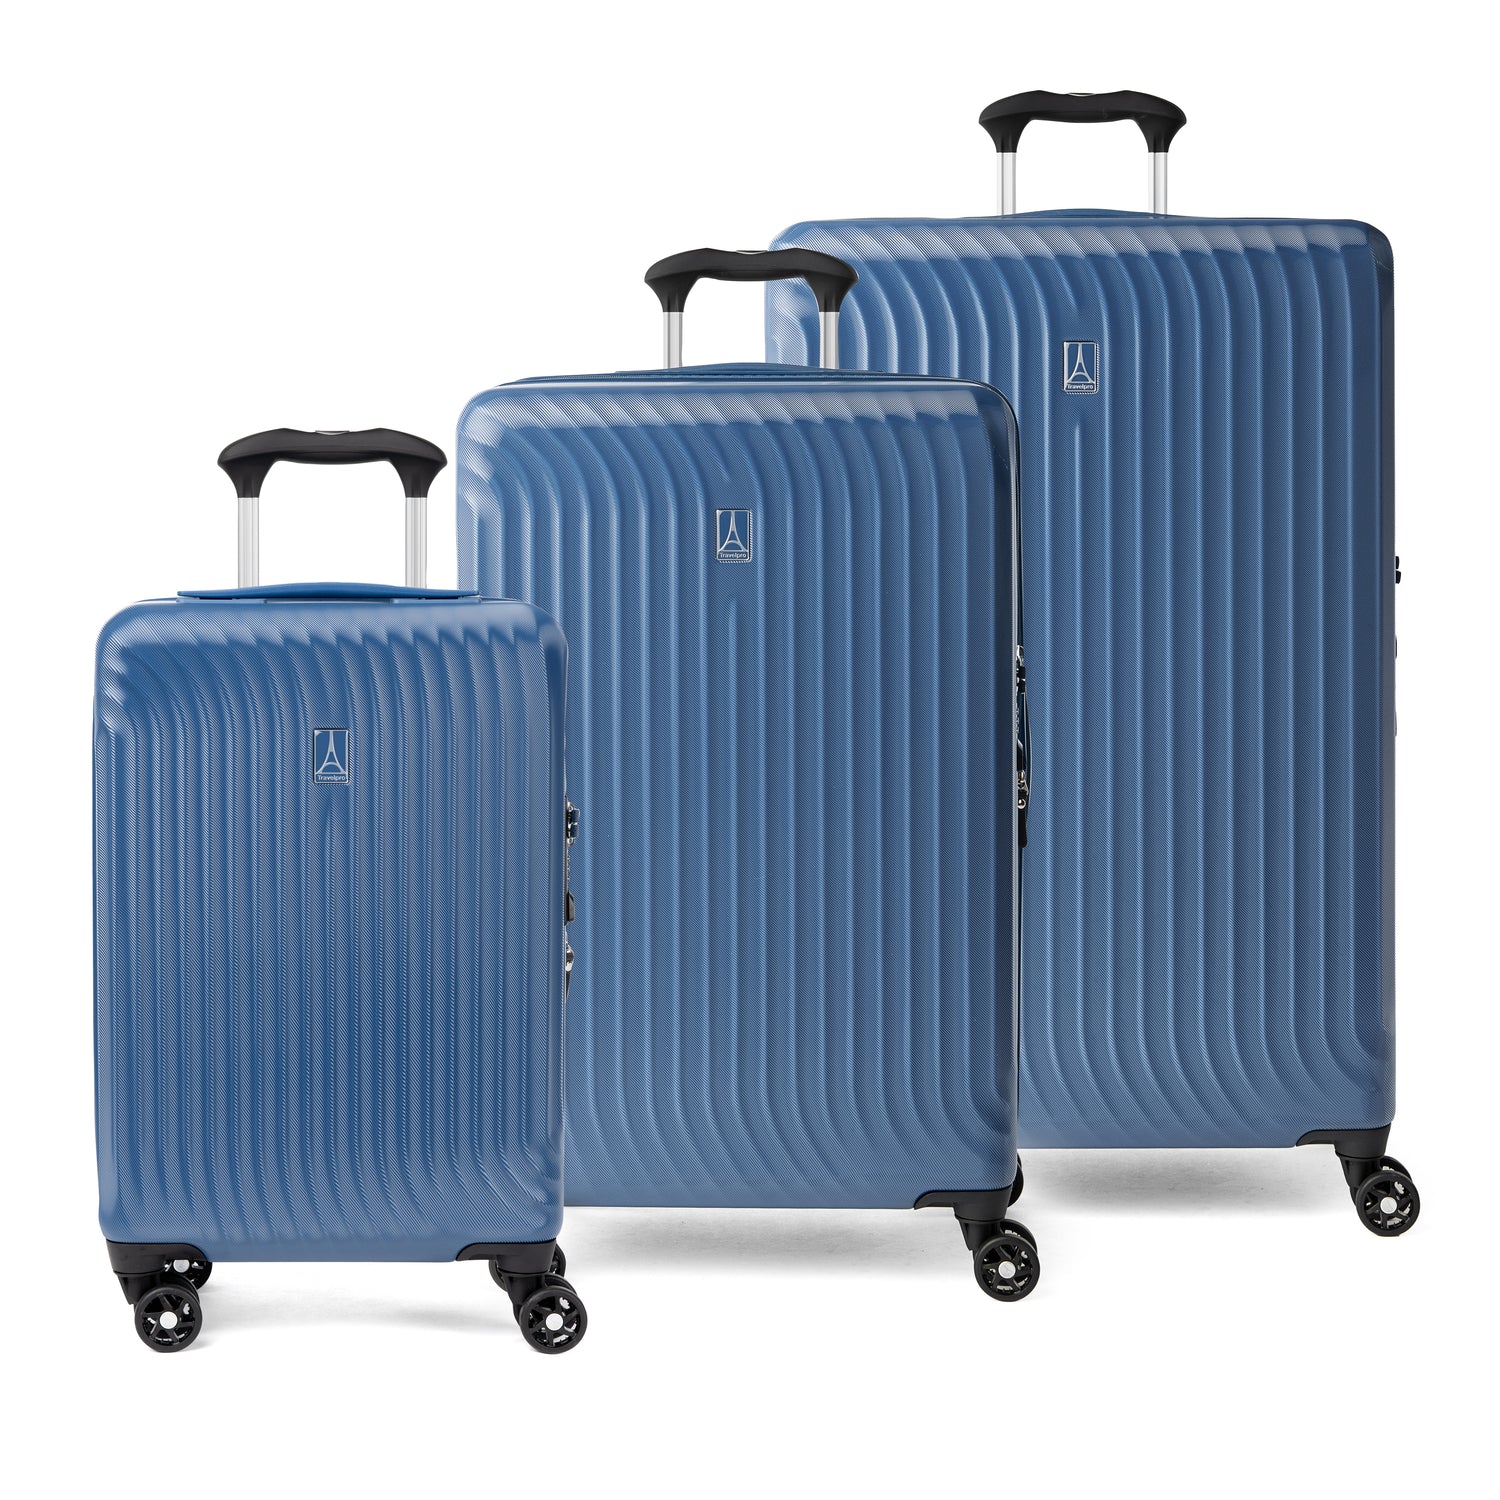 Maxlite® Air Compact Carry-On / Medium Check-in / Large Check-in Hardside Expandable Spinner Luggage Set